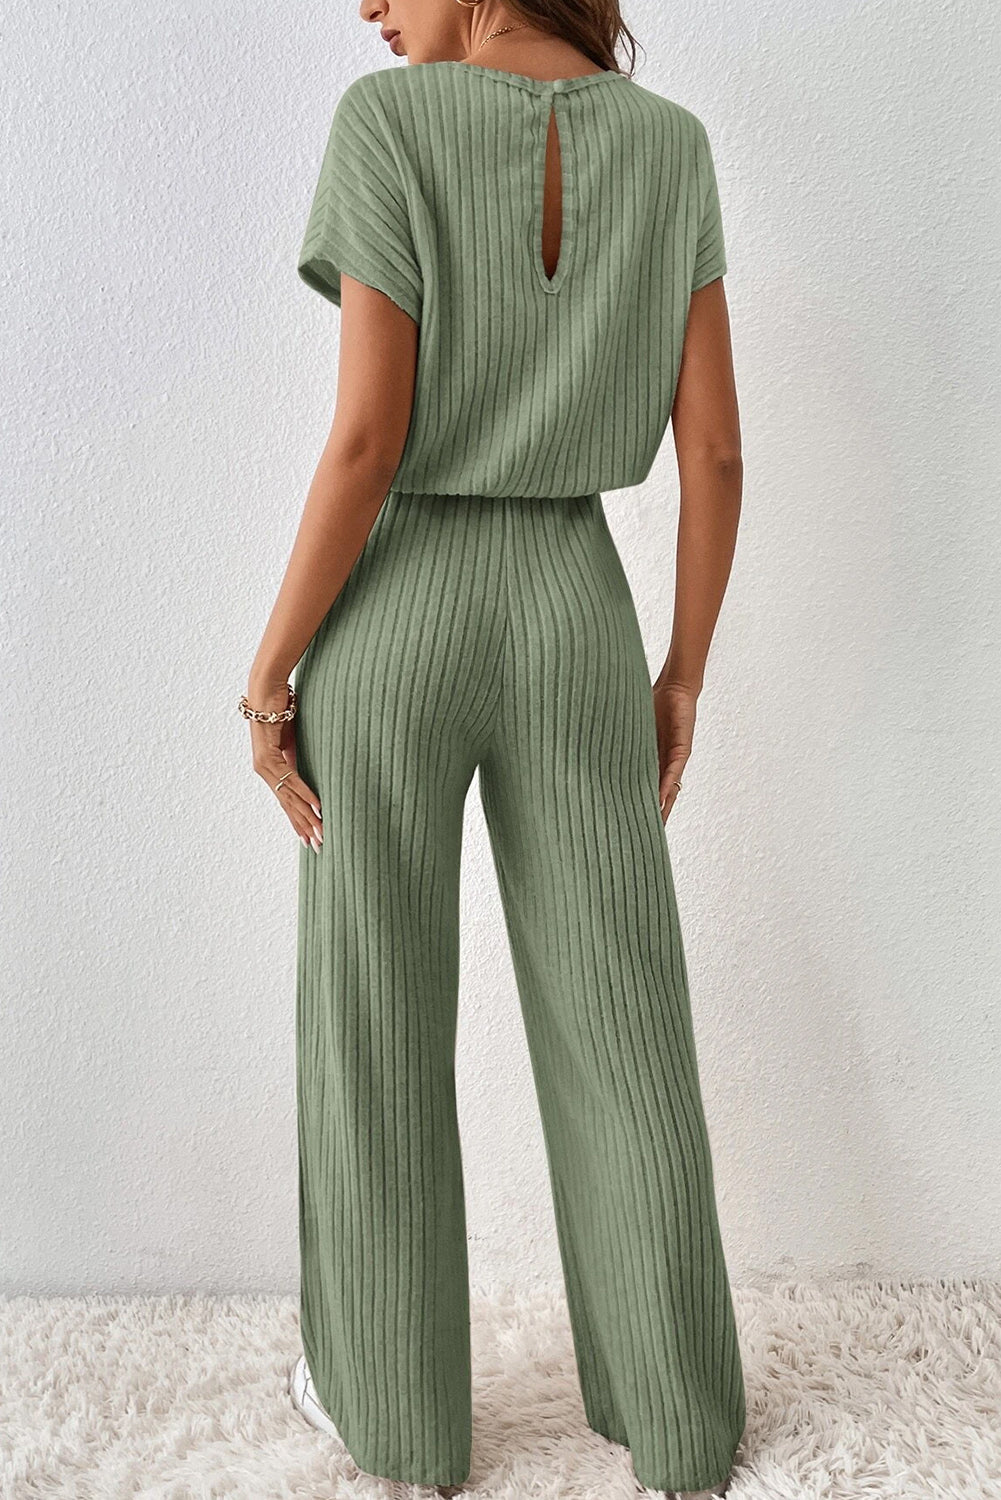 Grass Green Solid Color Ribbed Short Sleeve Wide Leg Jumpsuit-1